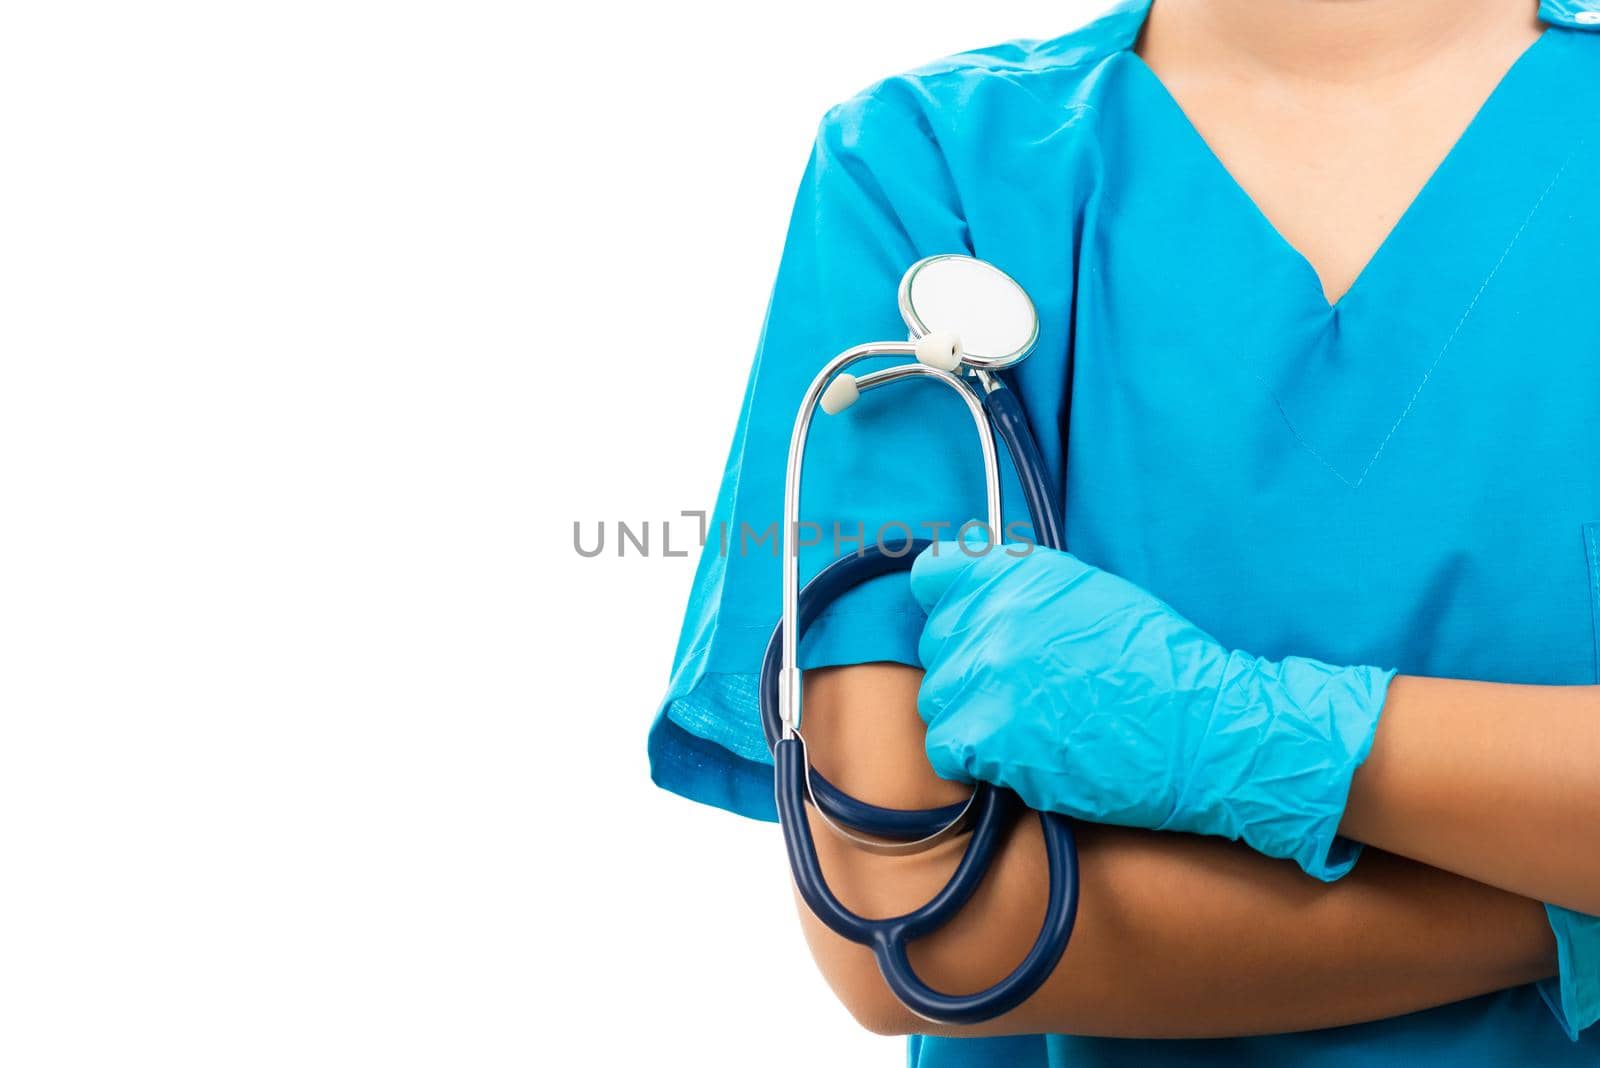 Female nurse with stethoscope puts on rubber gloves and wearing medical face mask, woman doctor in blue uniform crossed arms, studio shot isolated on over white background, medical health concept